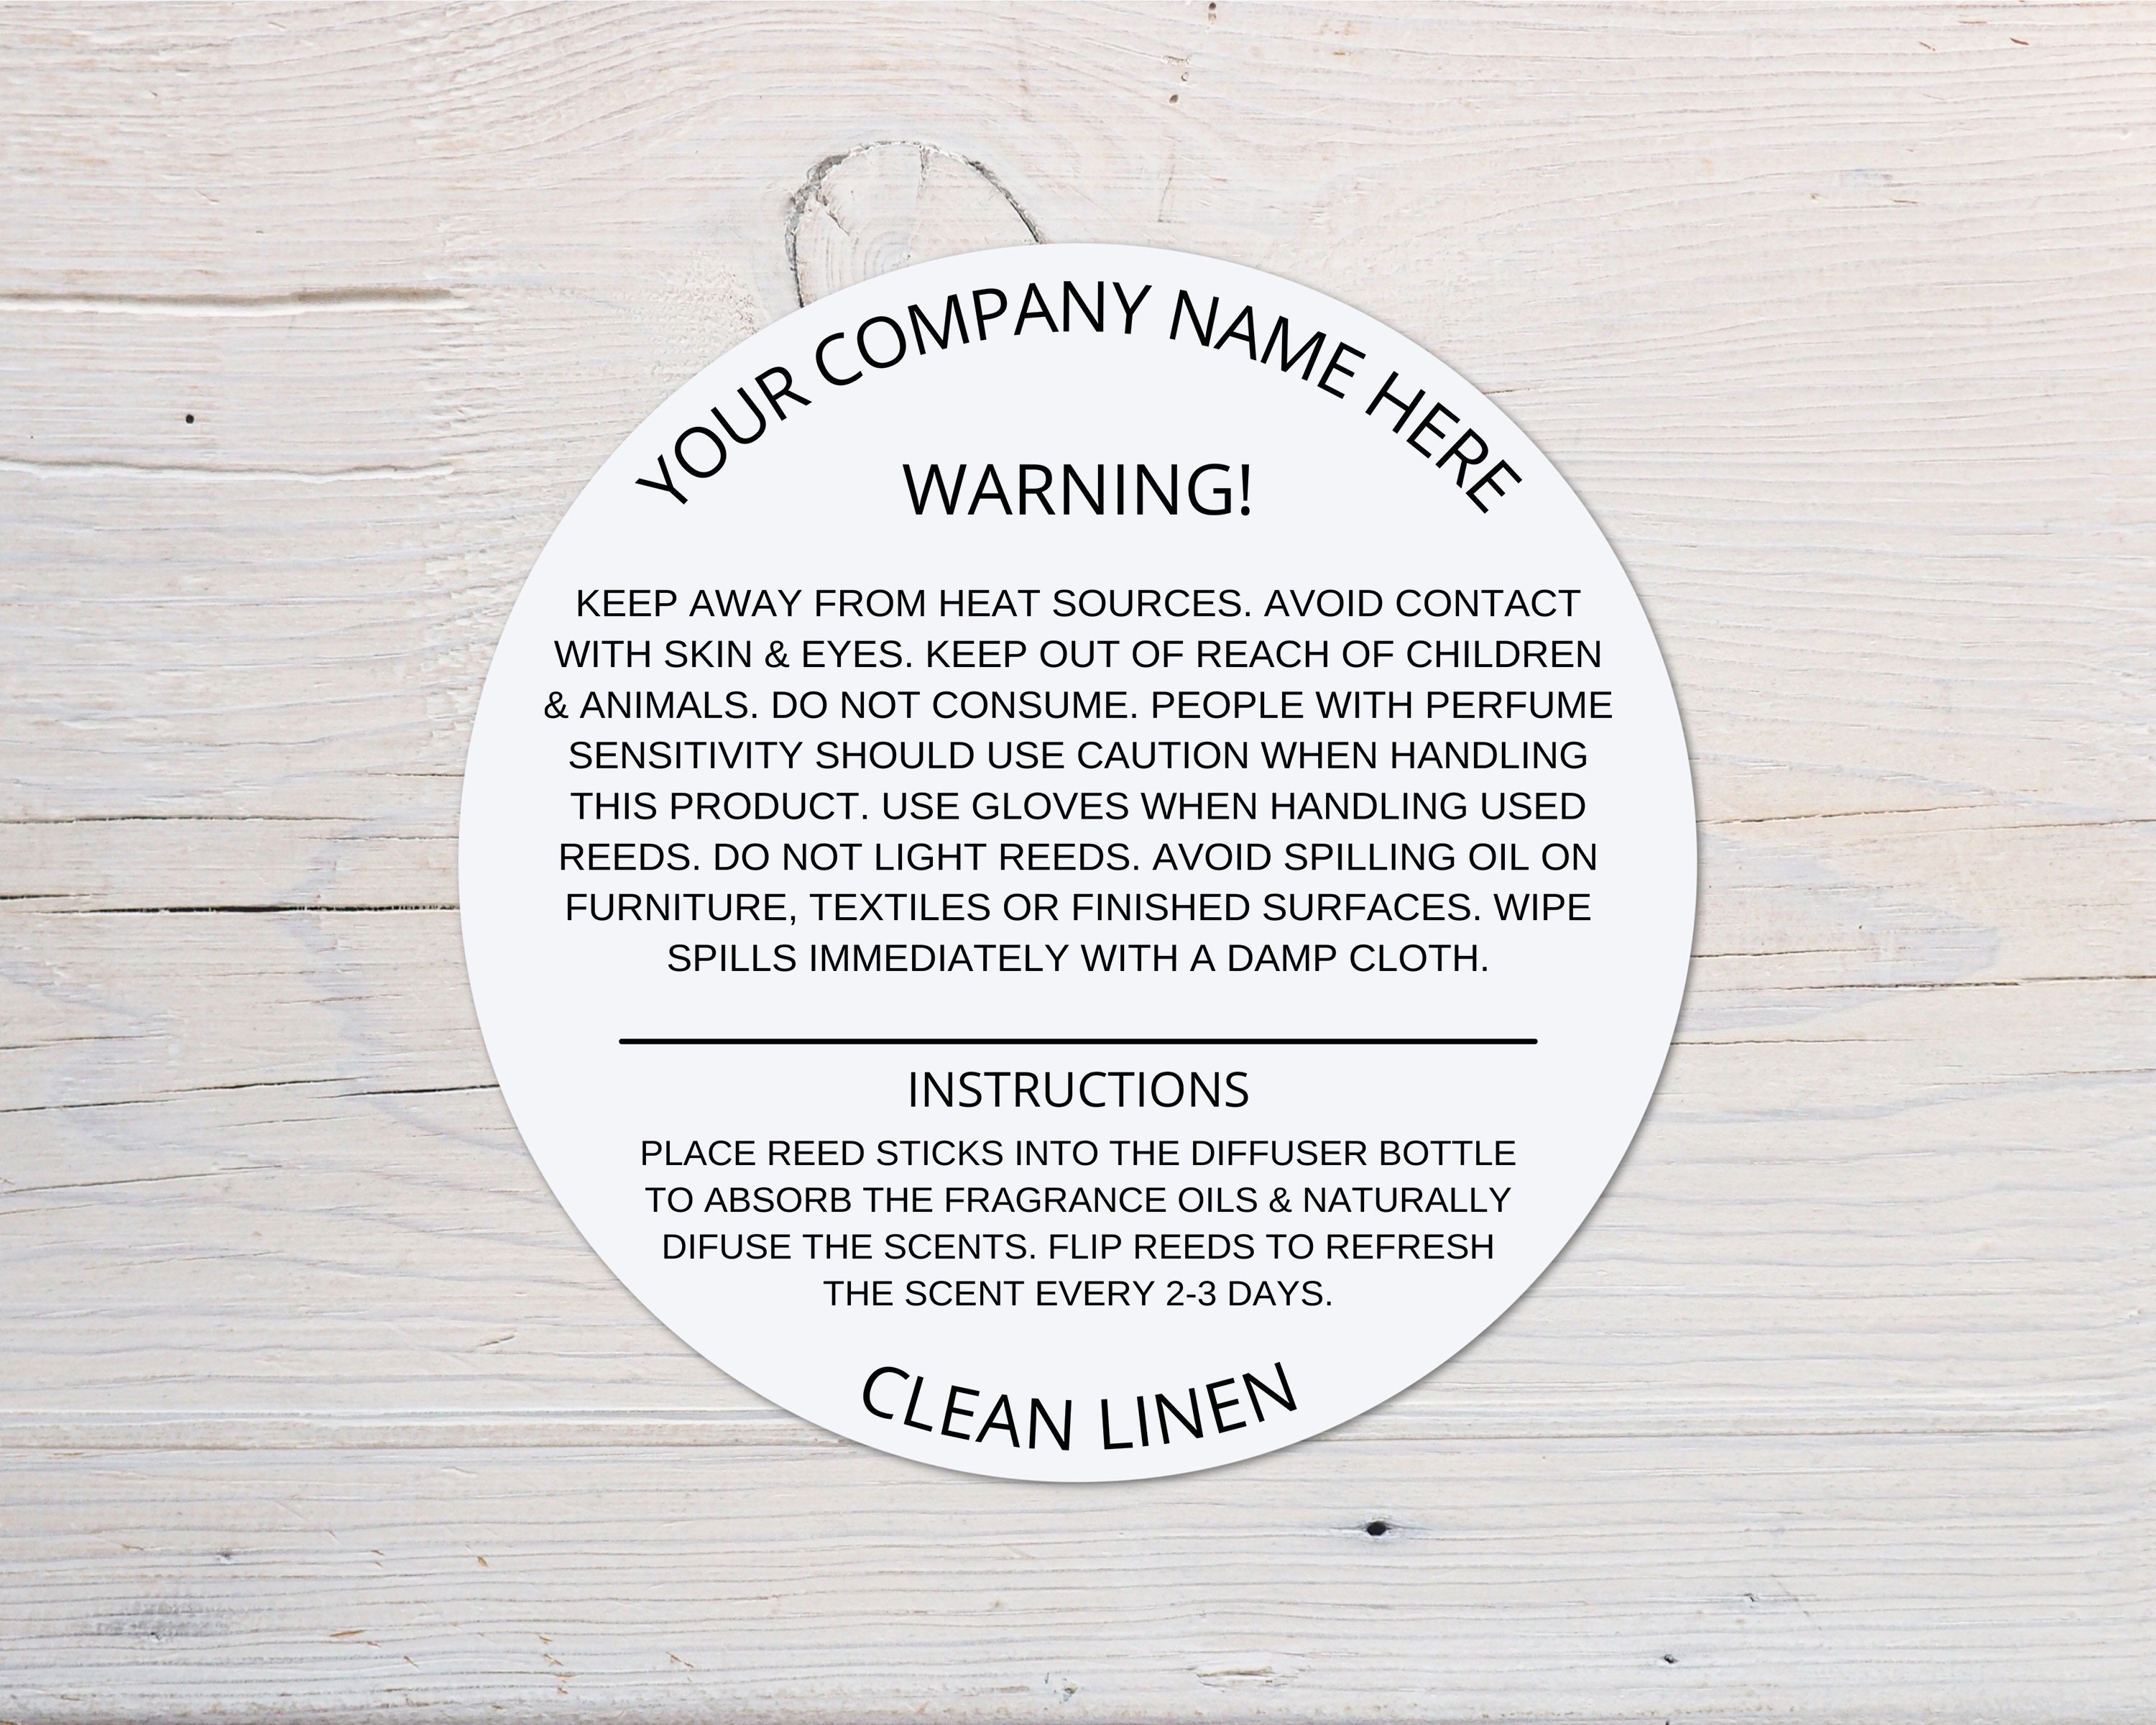 Reed Diffuser Warning Labels 2.5 x 1 Inch - CandleScience